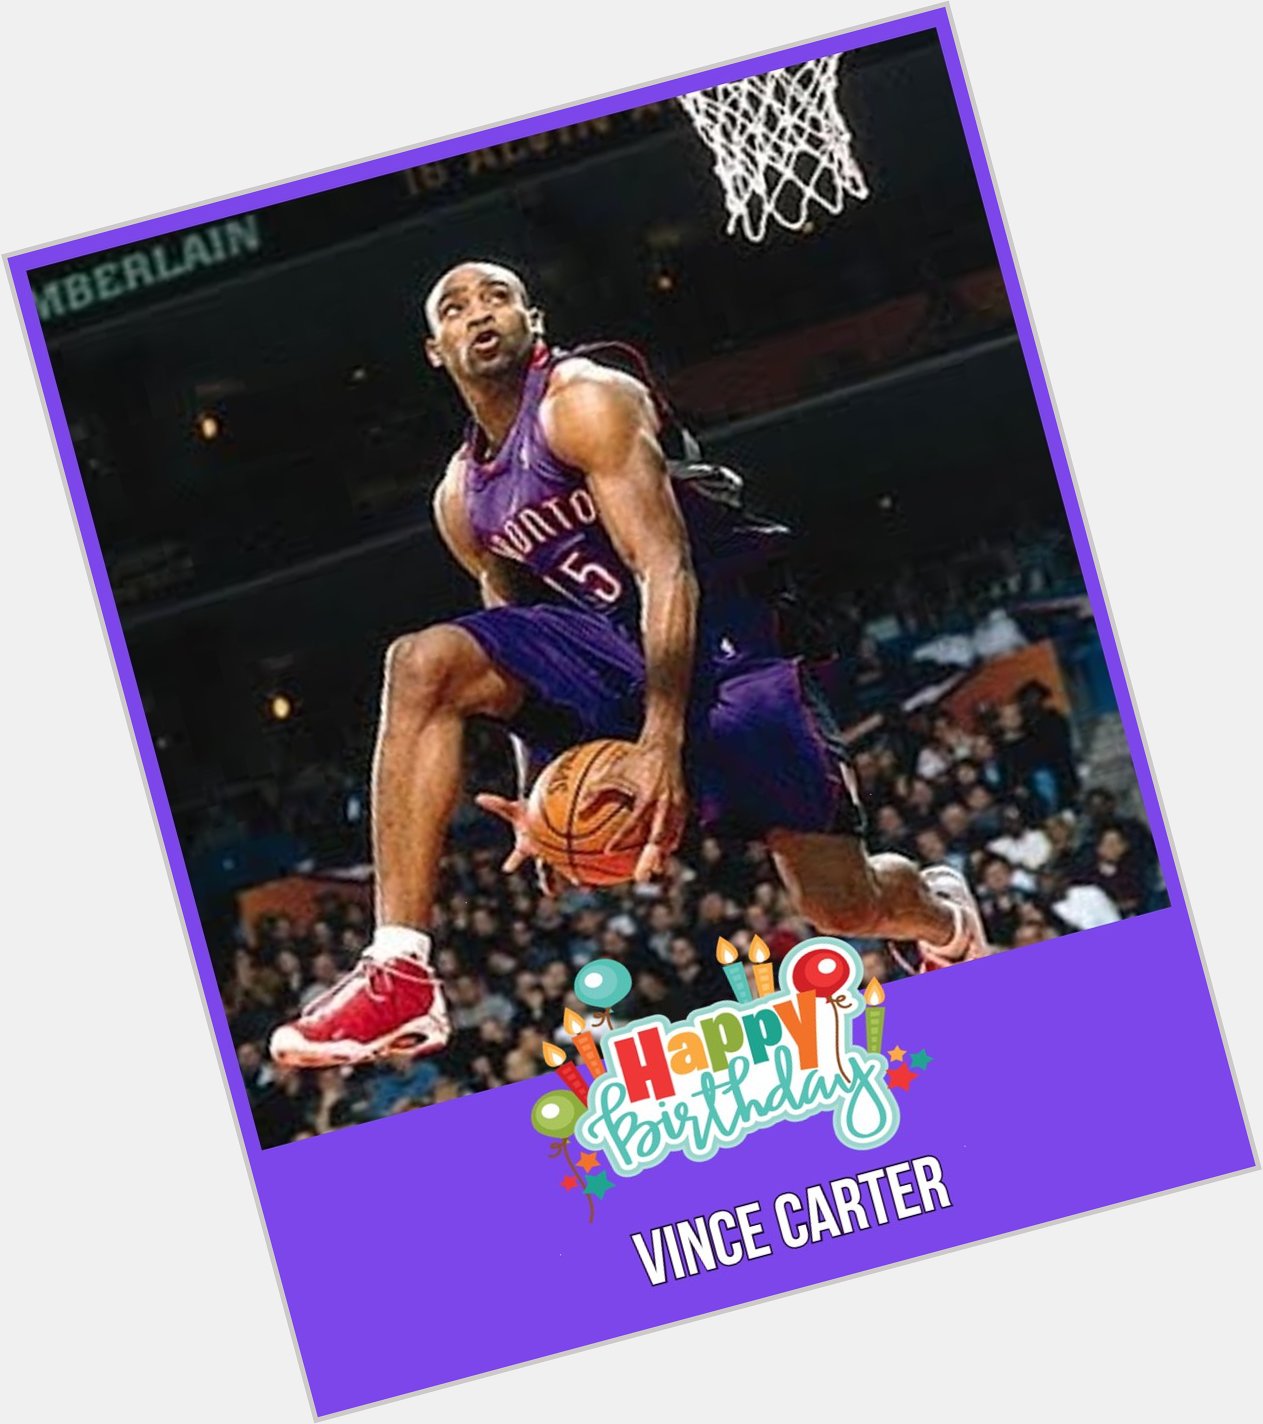 Not movie related, but best dunk contest ever. happy birthday vince carter 